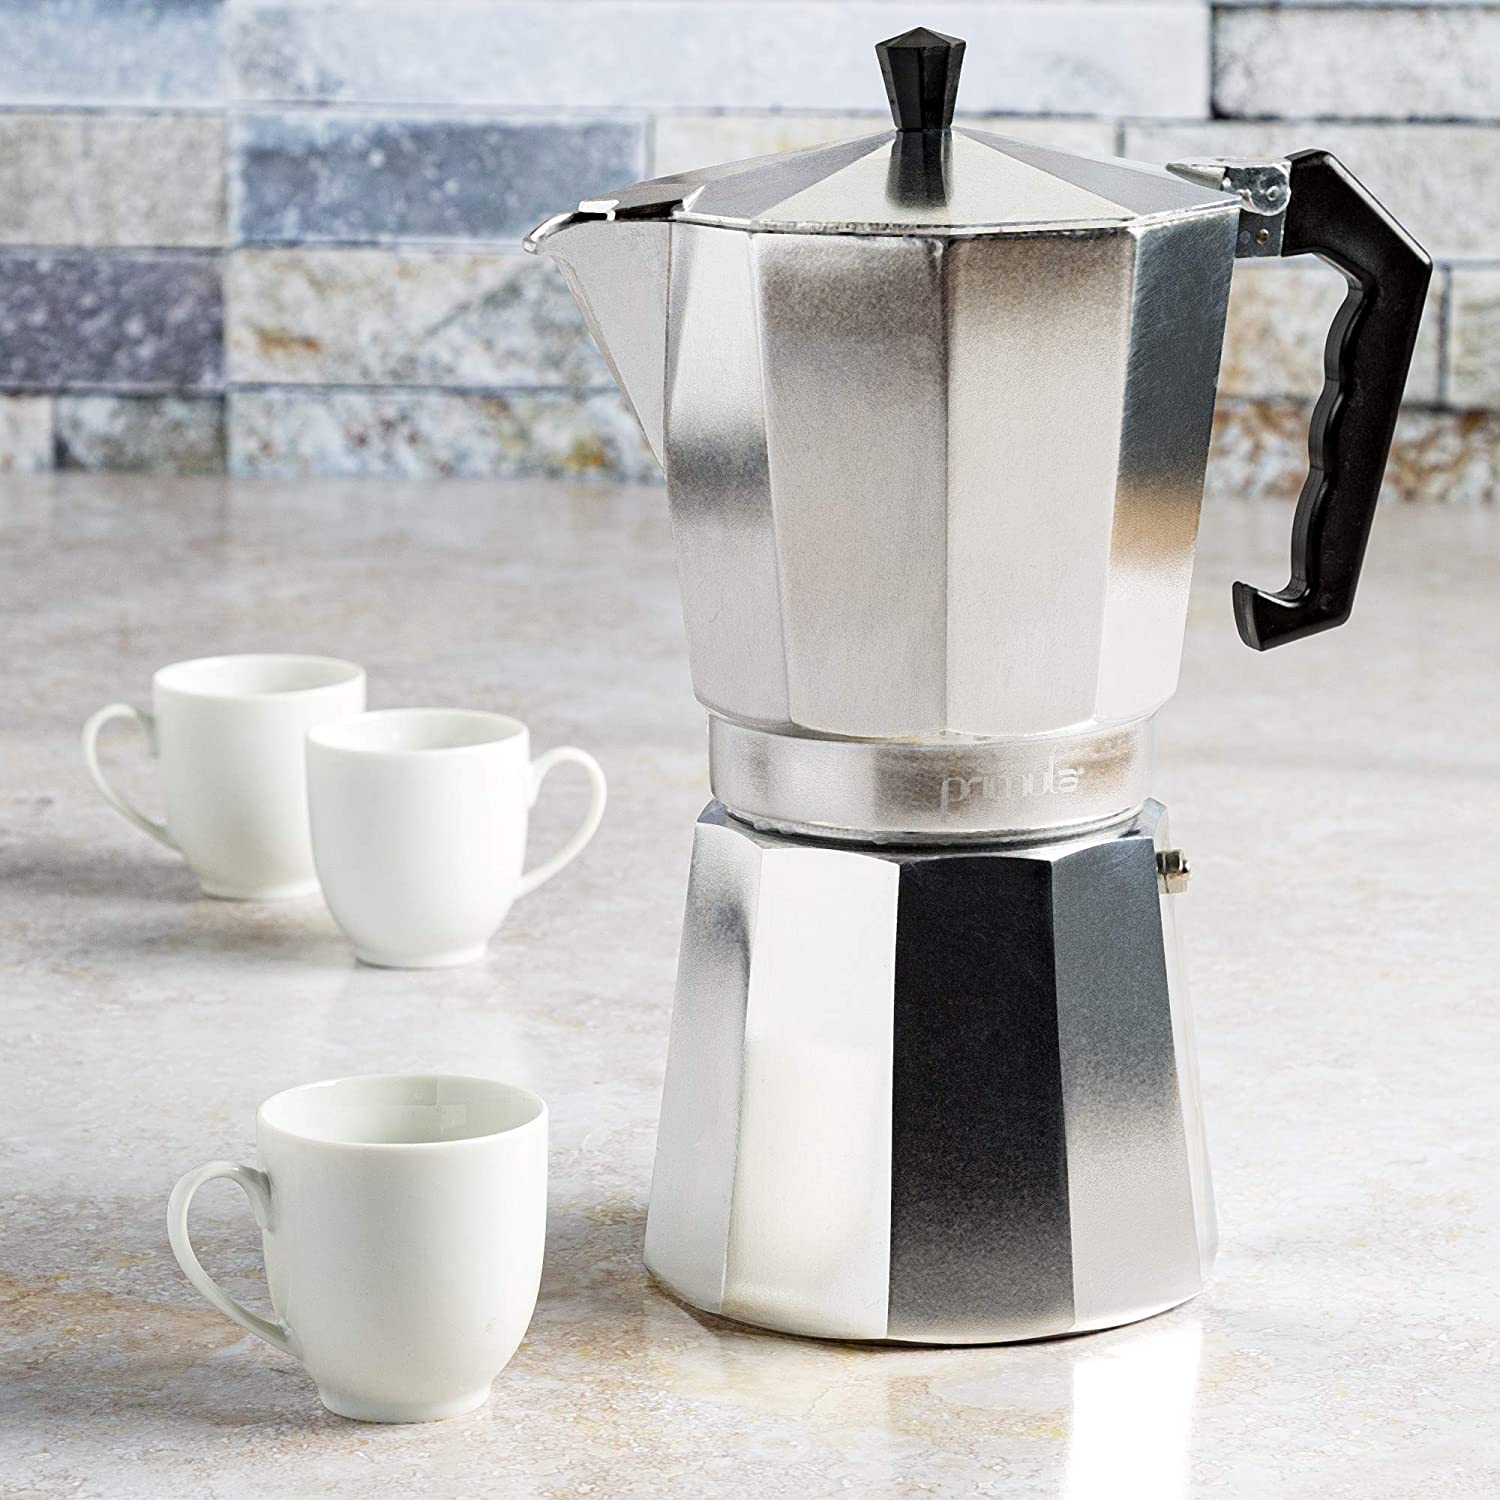 Classic Stovetop Espresso And Coffee Maker, 1cup/2cup/3cup/6cup